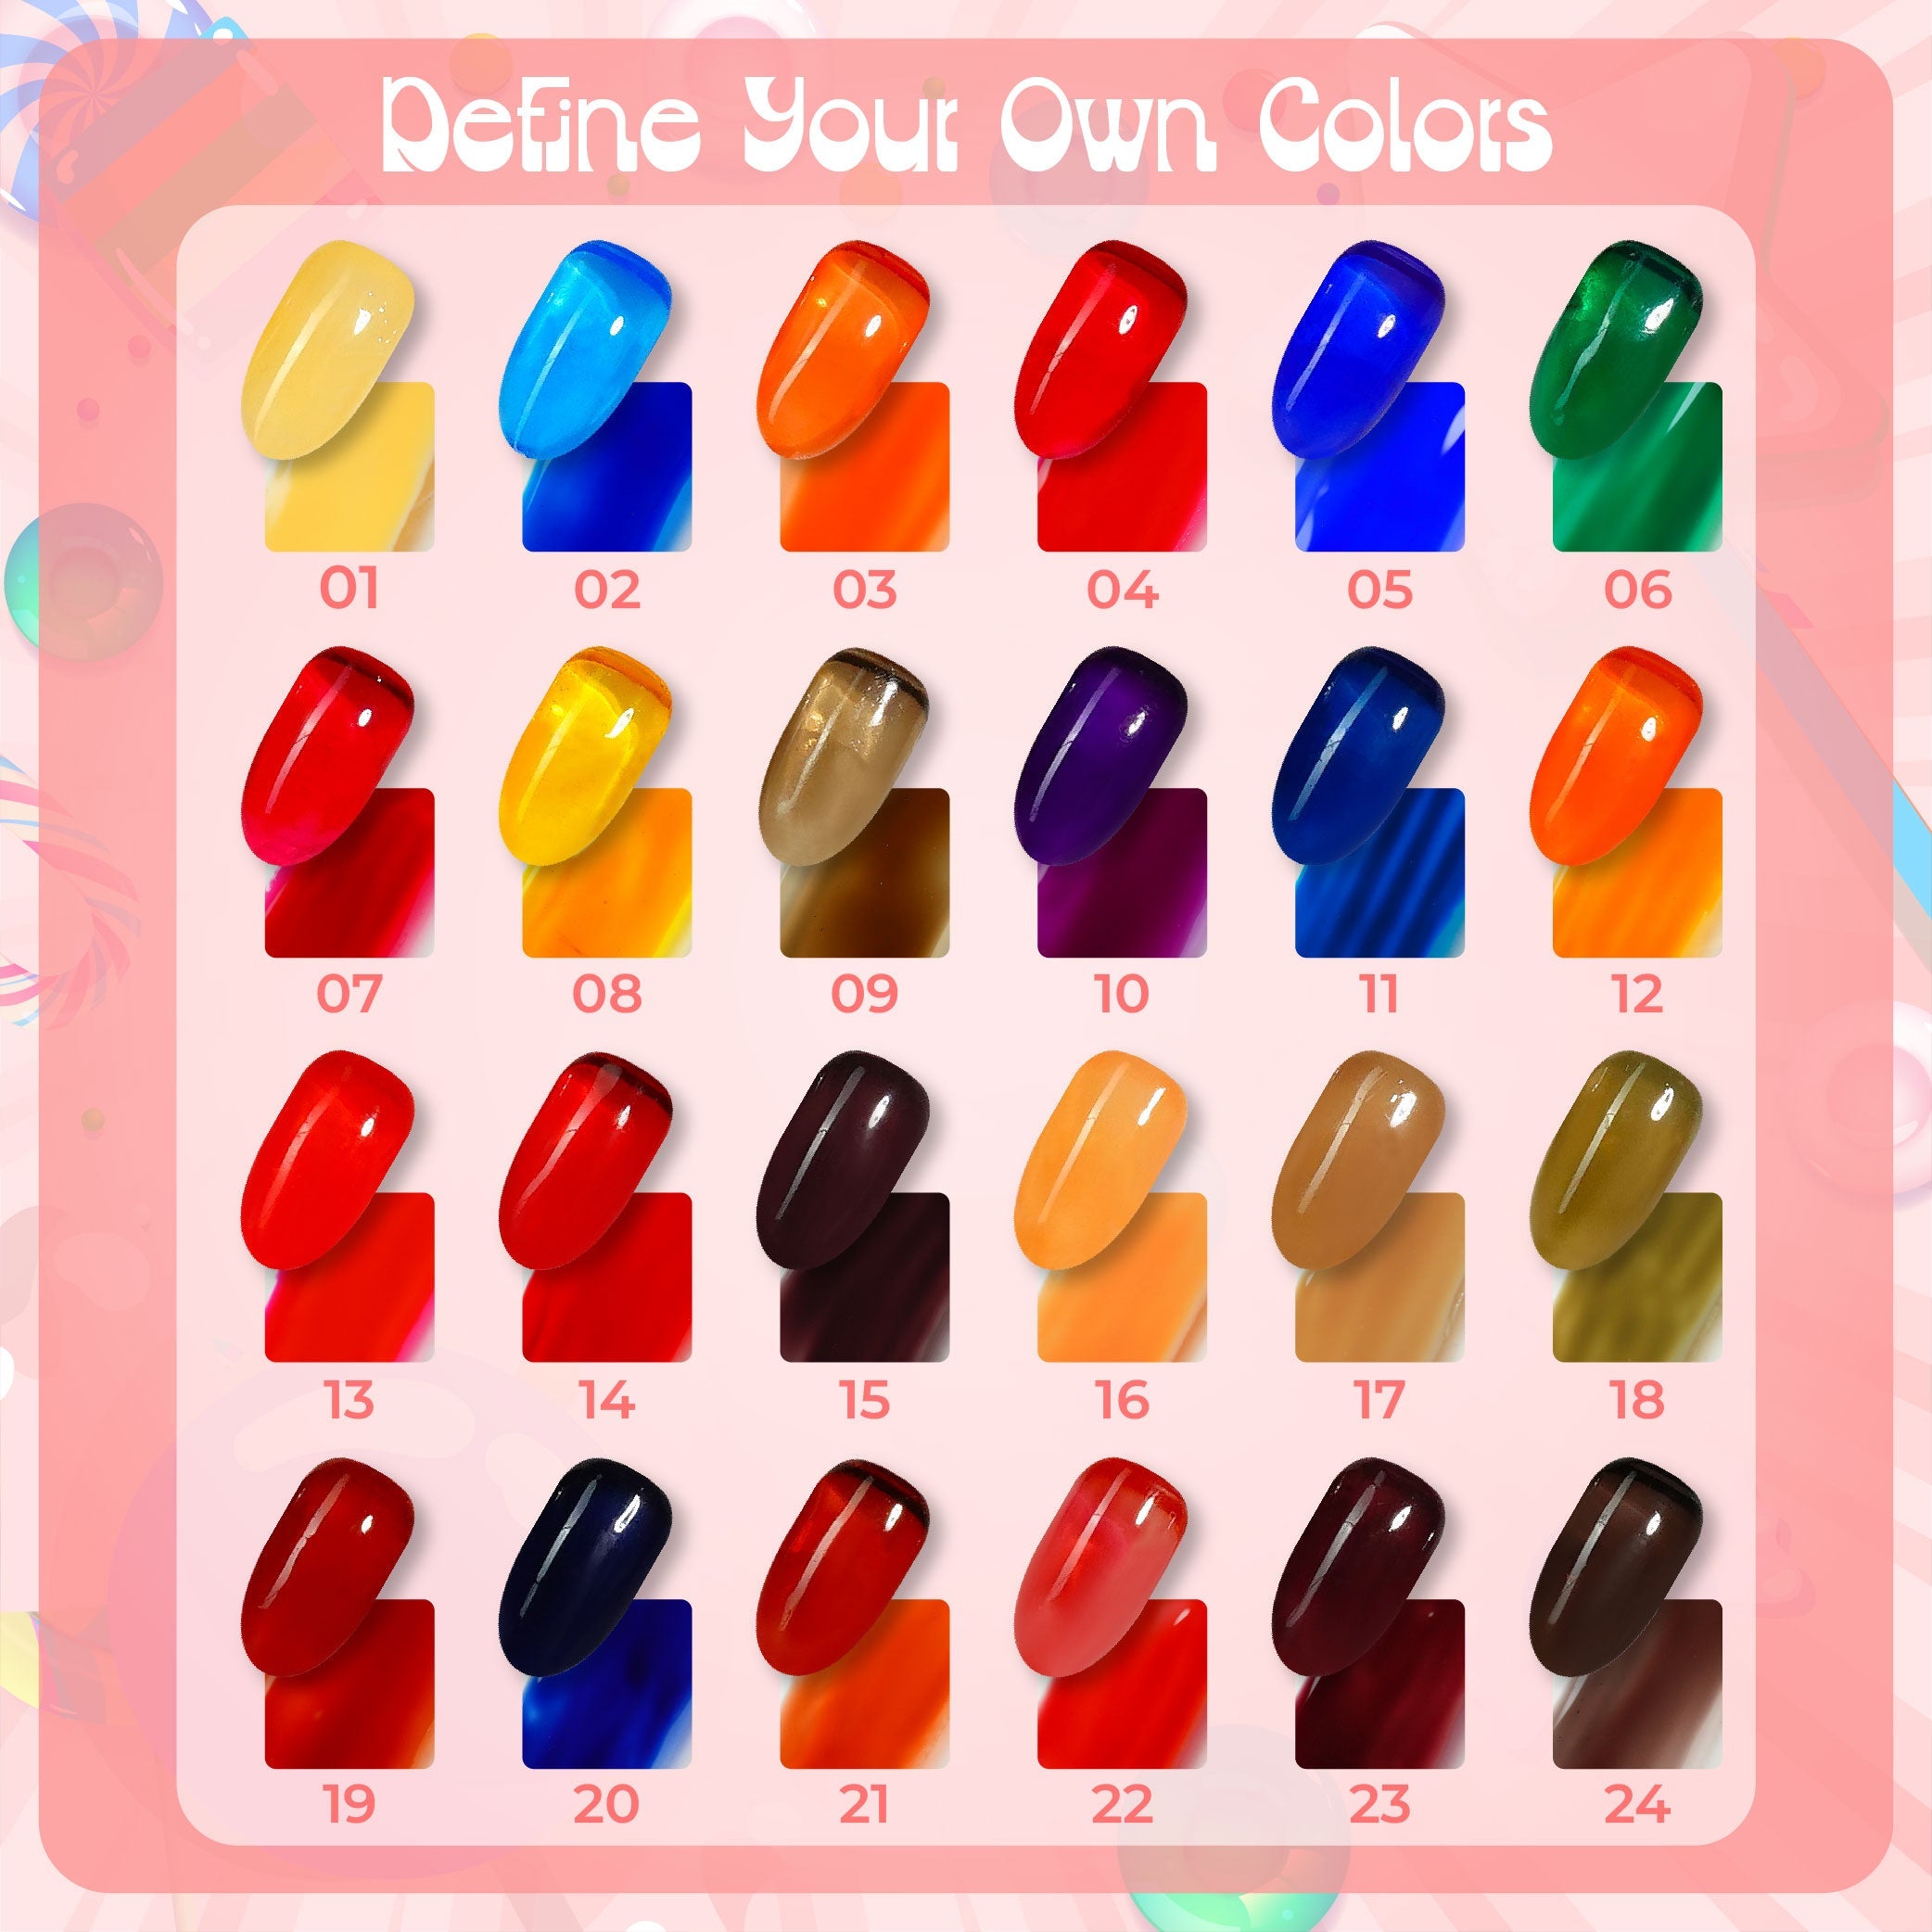 Jelly Gel Polish Colors - Lavis J02-19 - Candy Collection